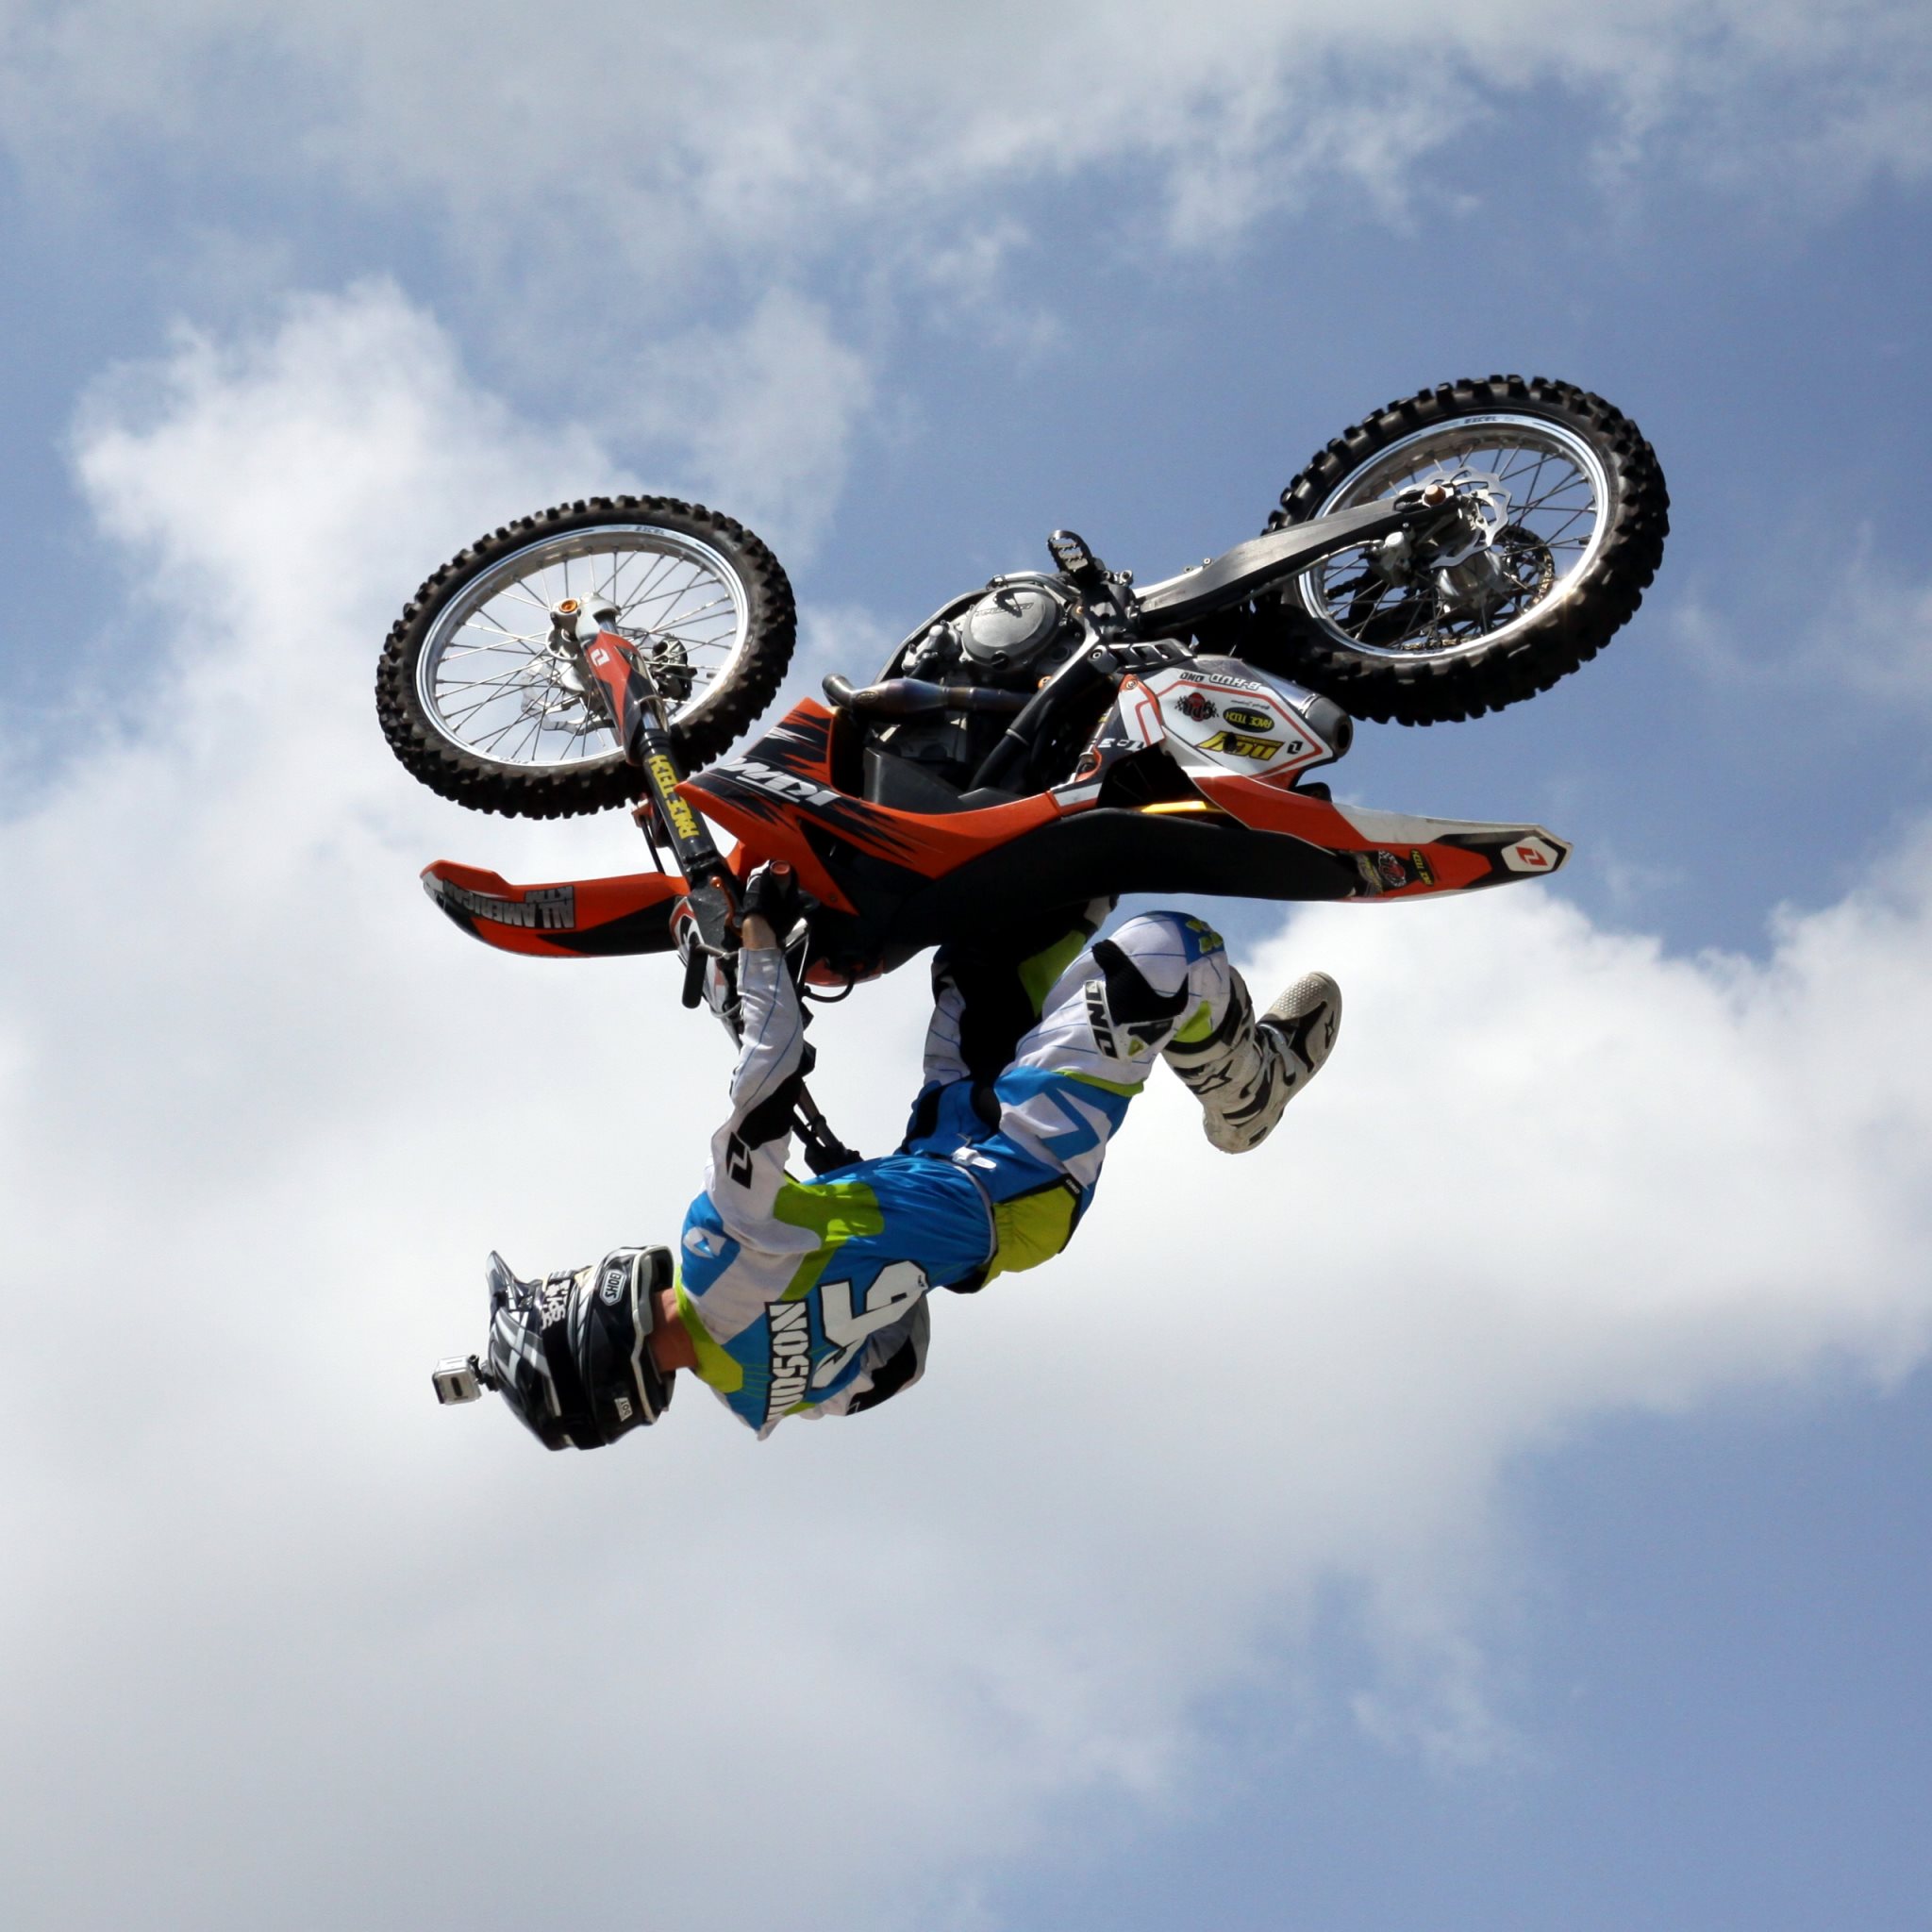 Motorcycle Aerial Acrobatics HD Wallpapers | Photos & Images